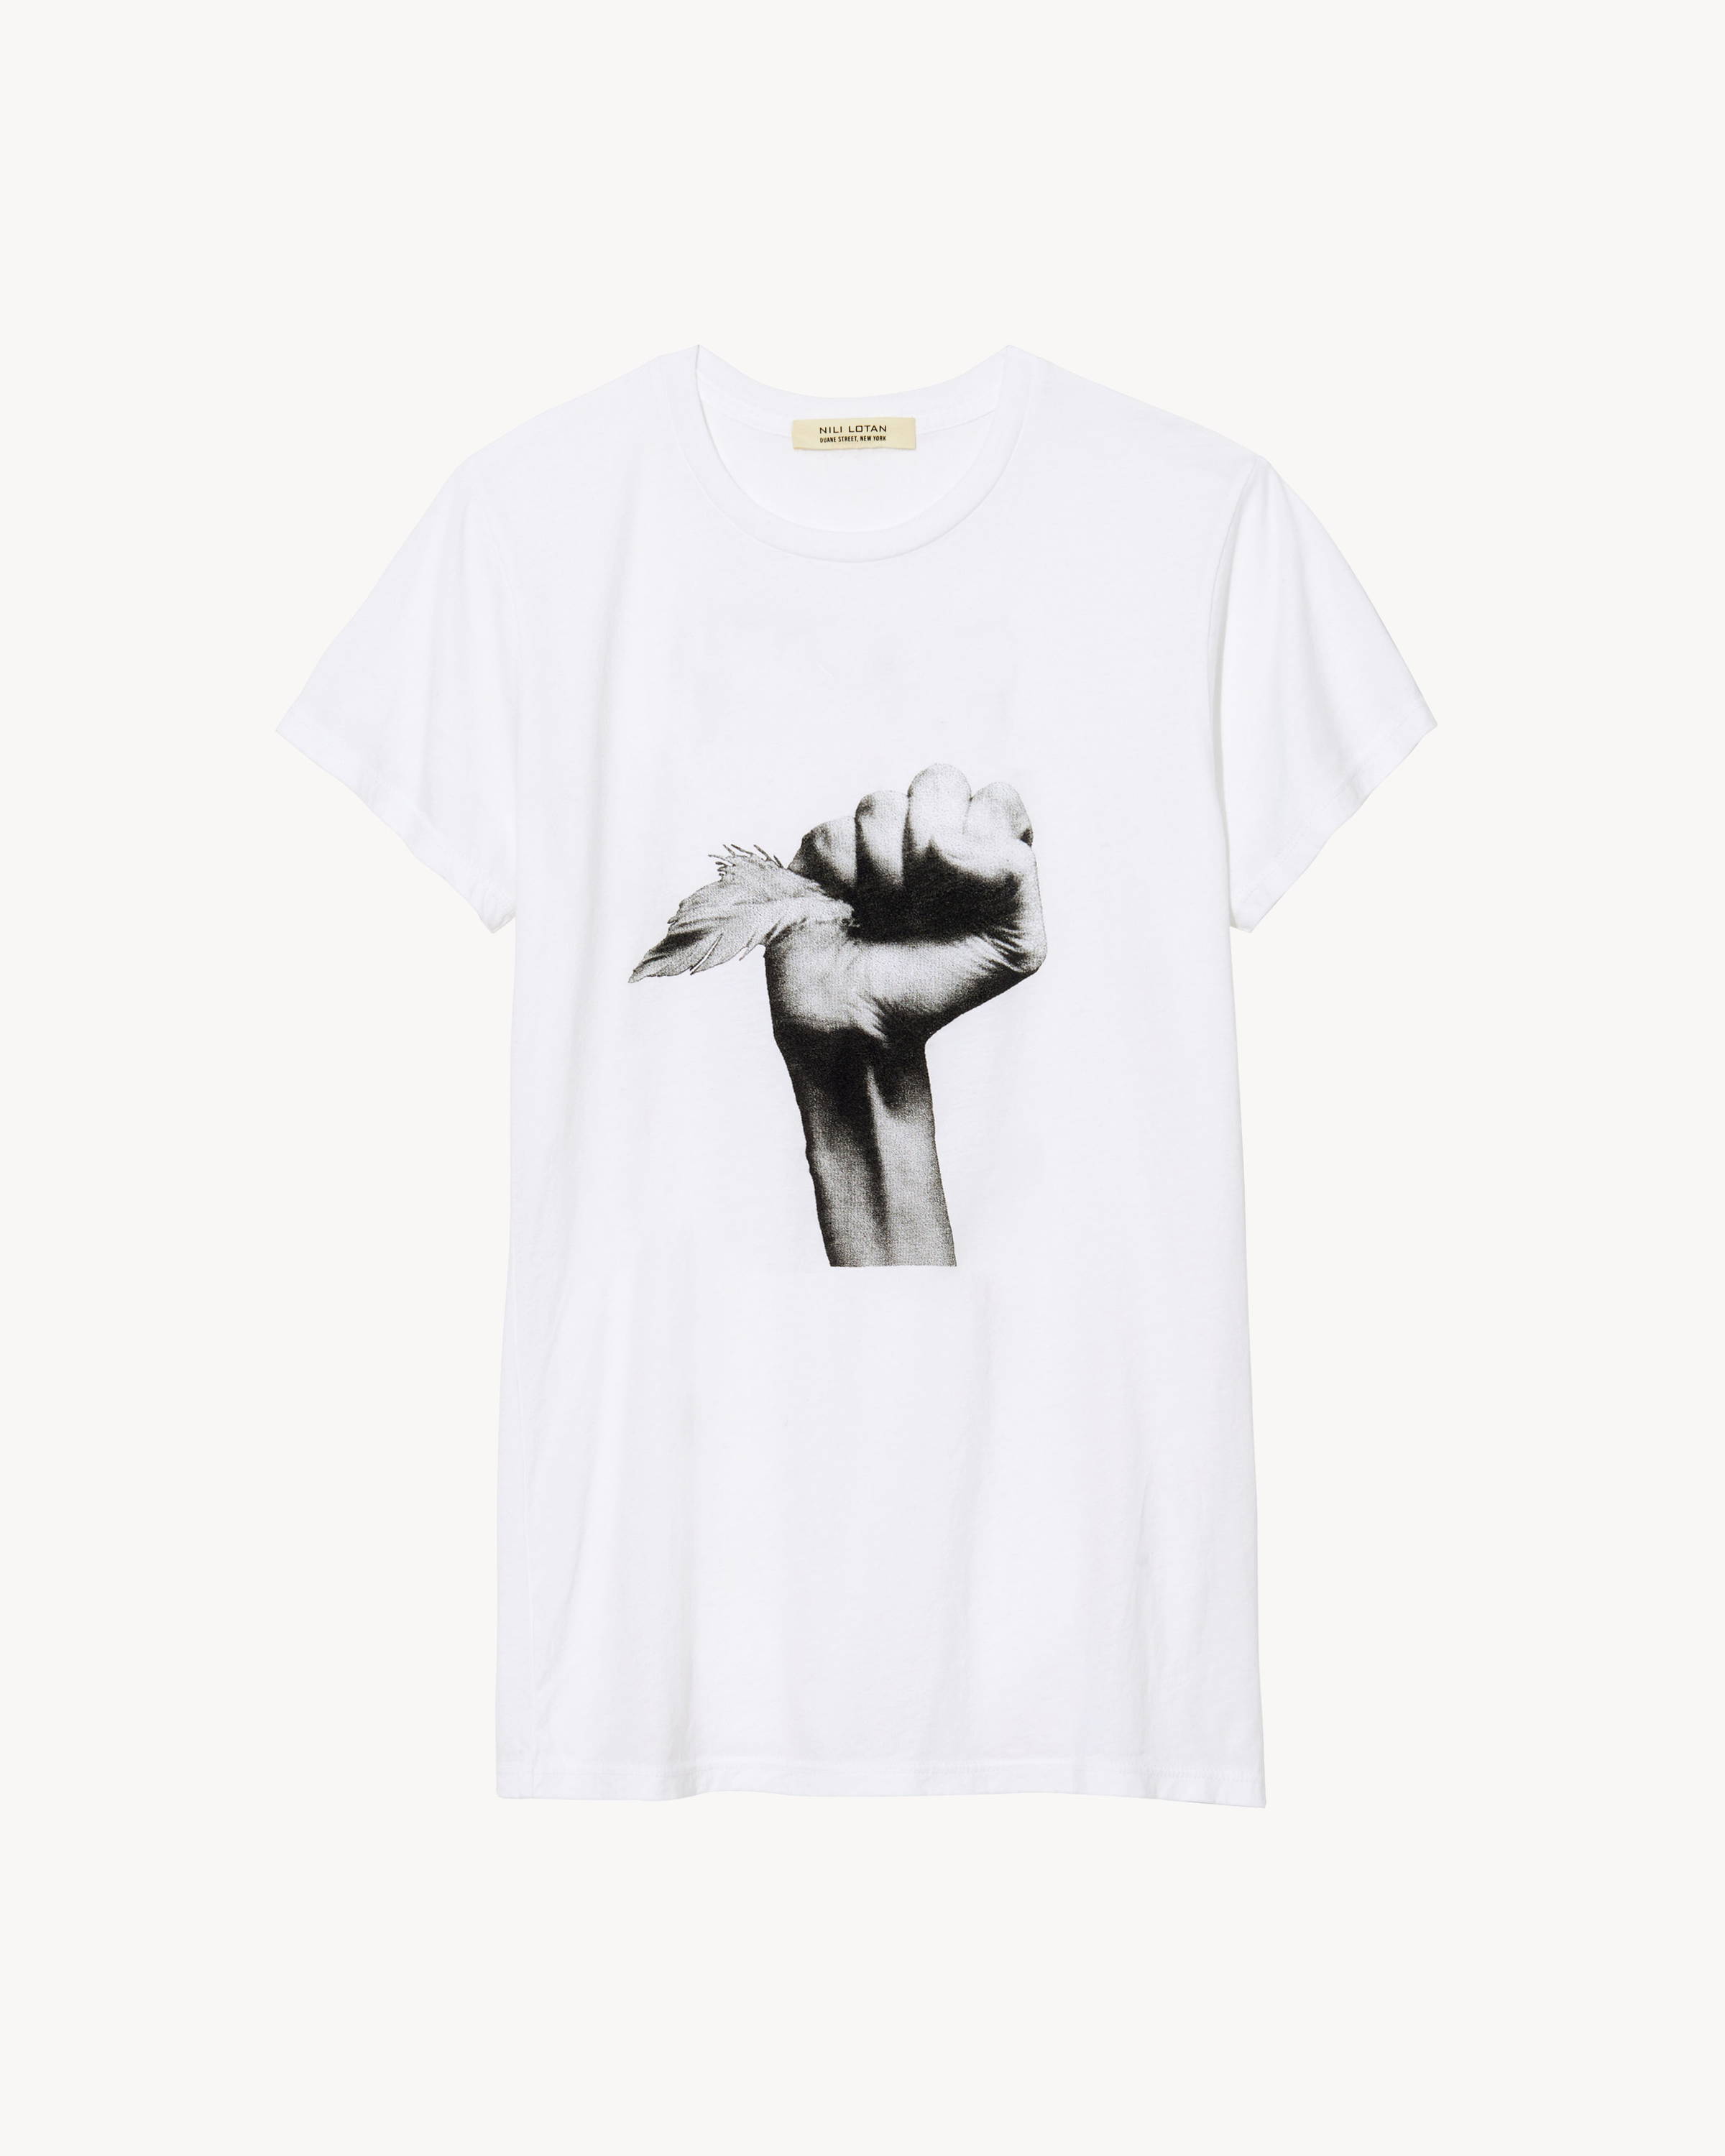 A white tee with a black and white image of a hand holding a feather.